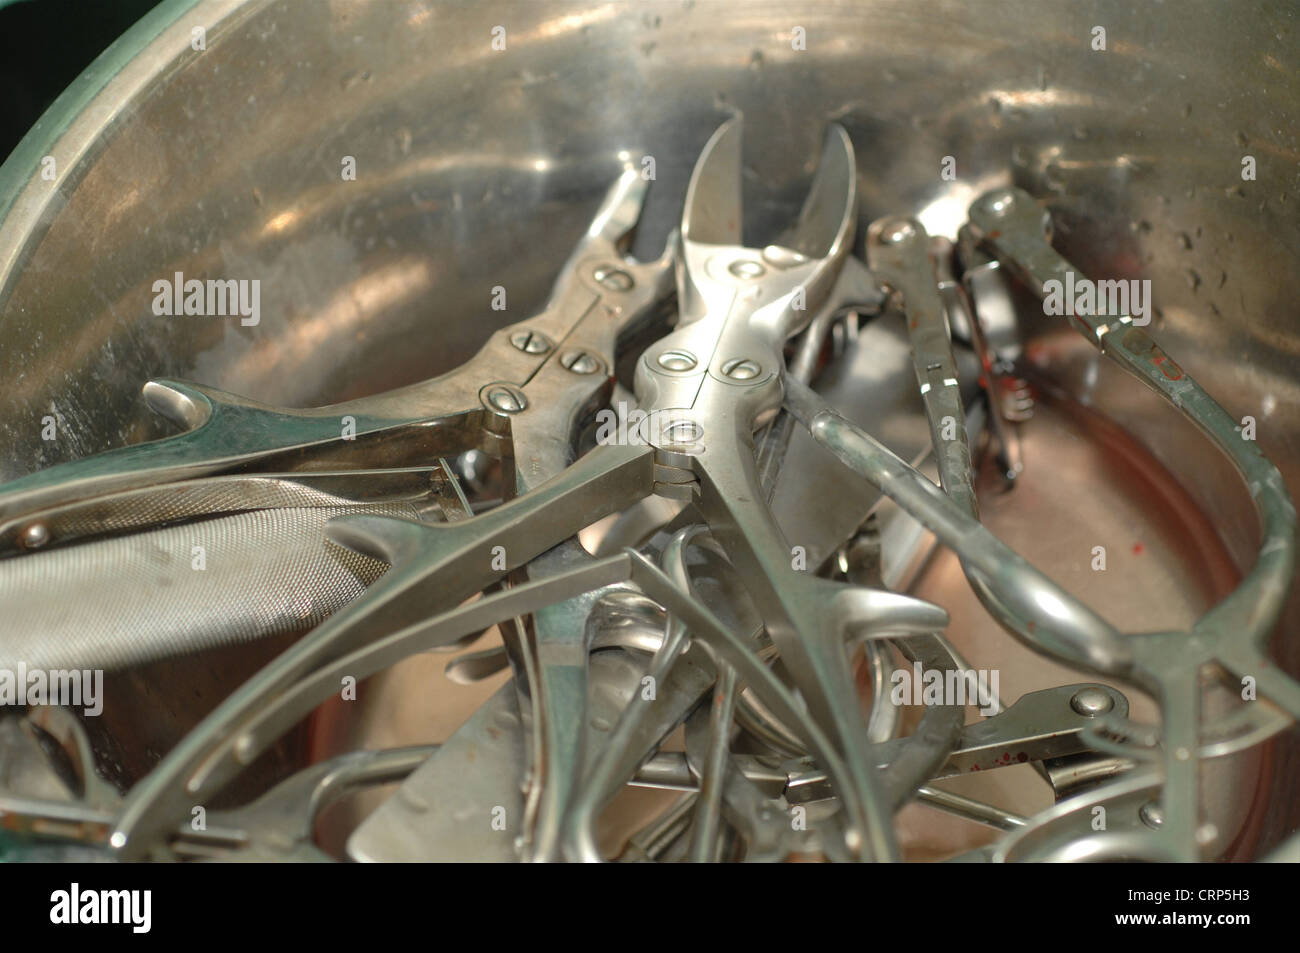 Surgical hand tools, ready to be cleaned. Stock Photo